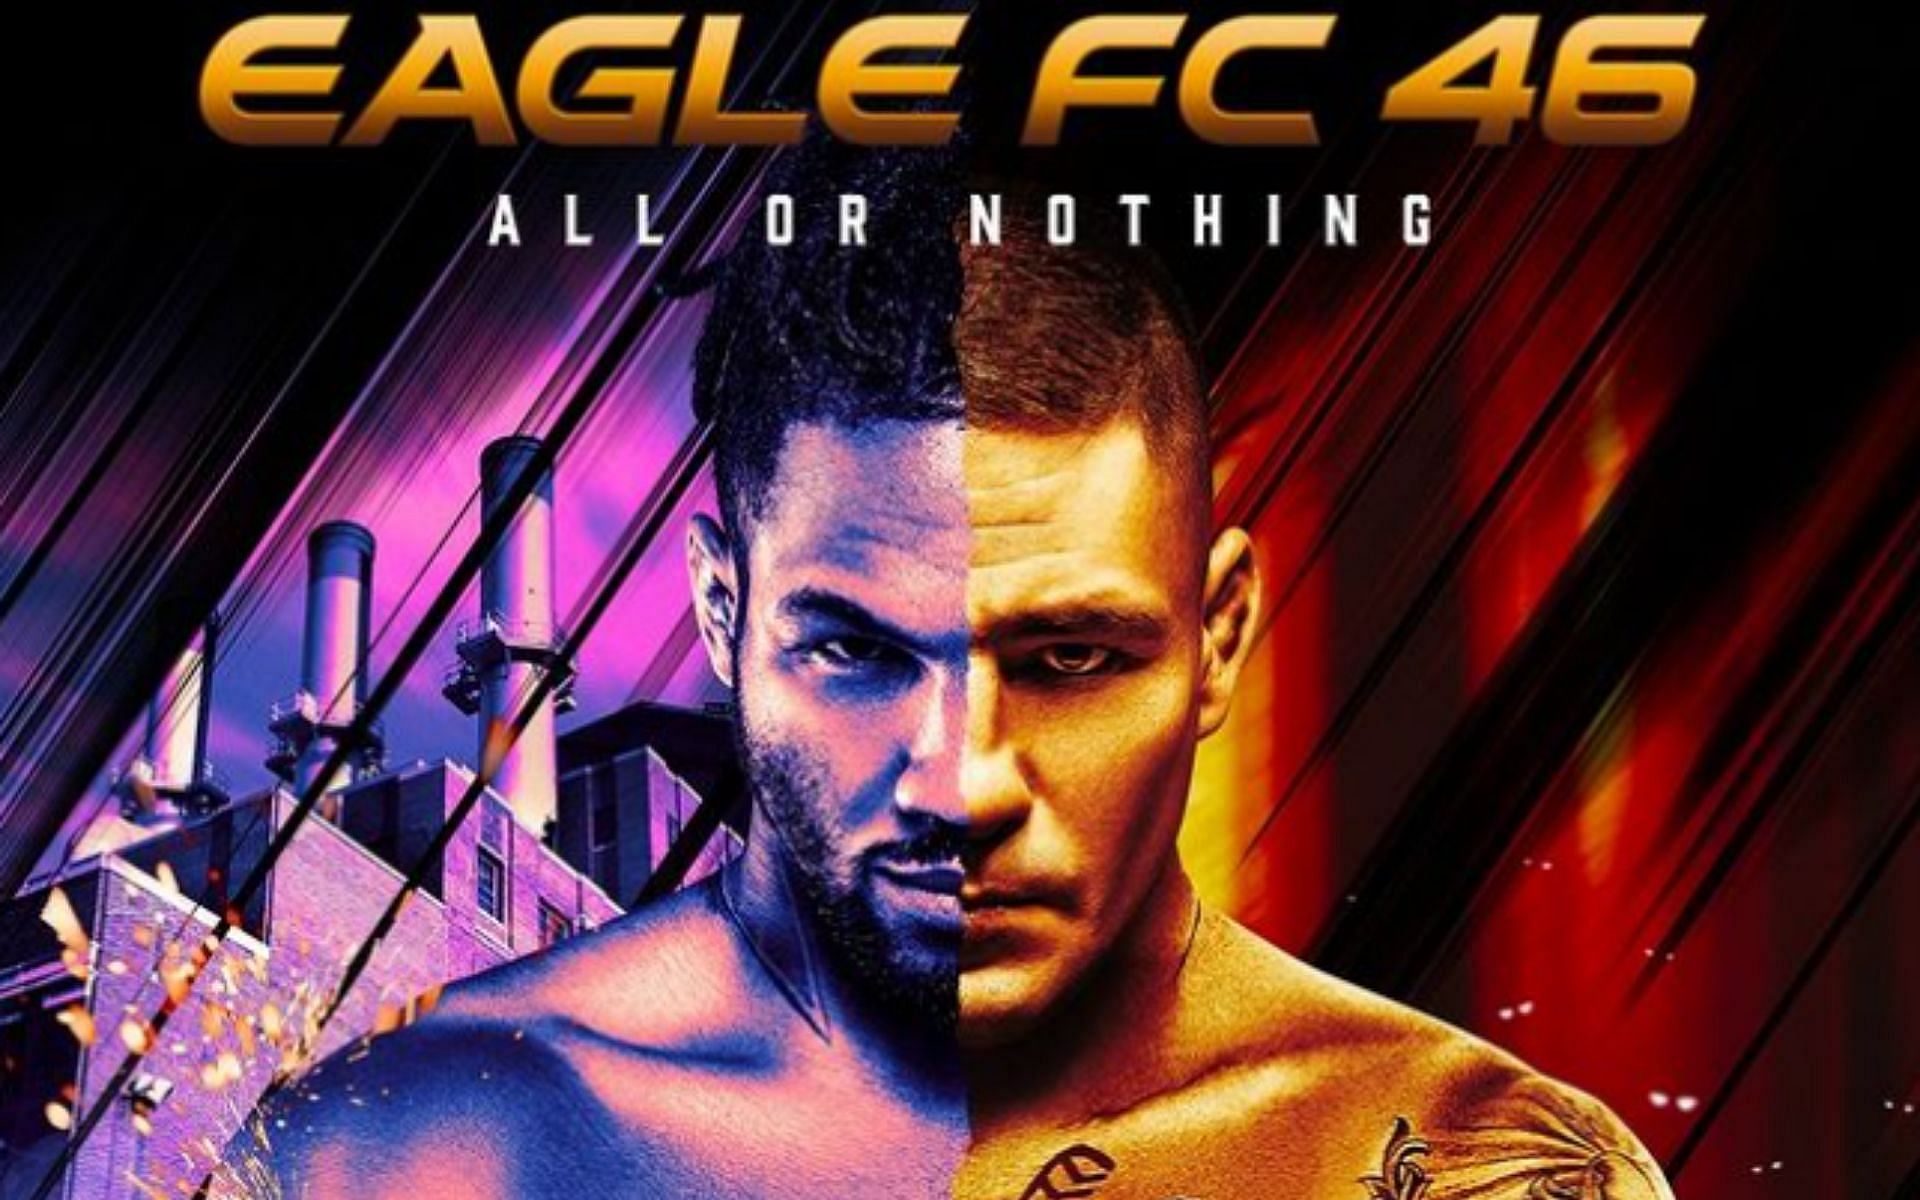 Eagle FC 46: Full fight card results and video highlights